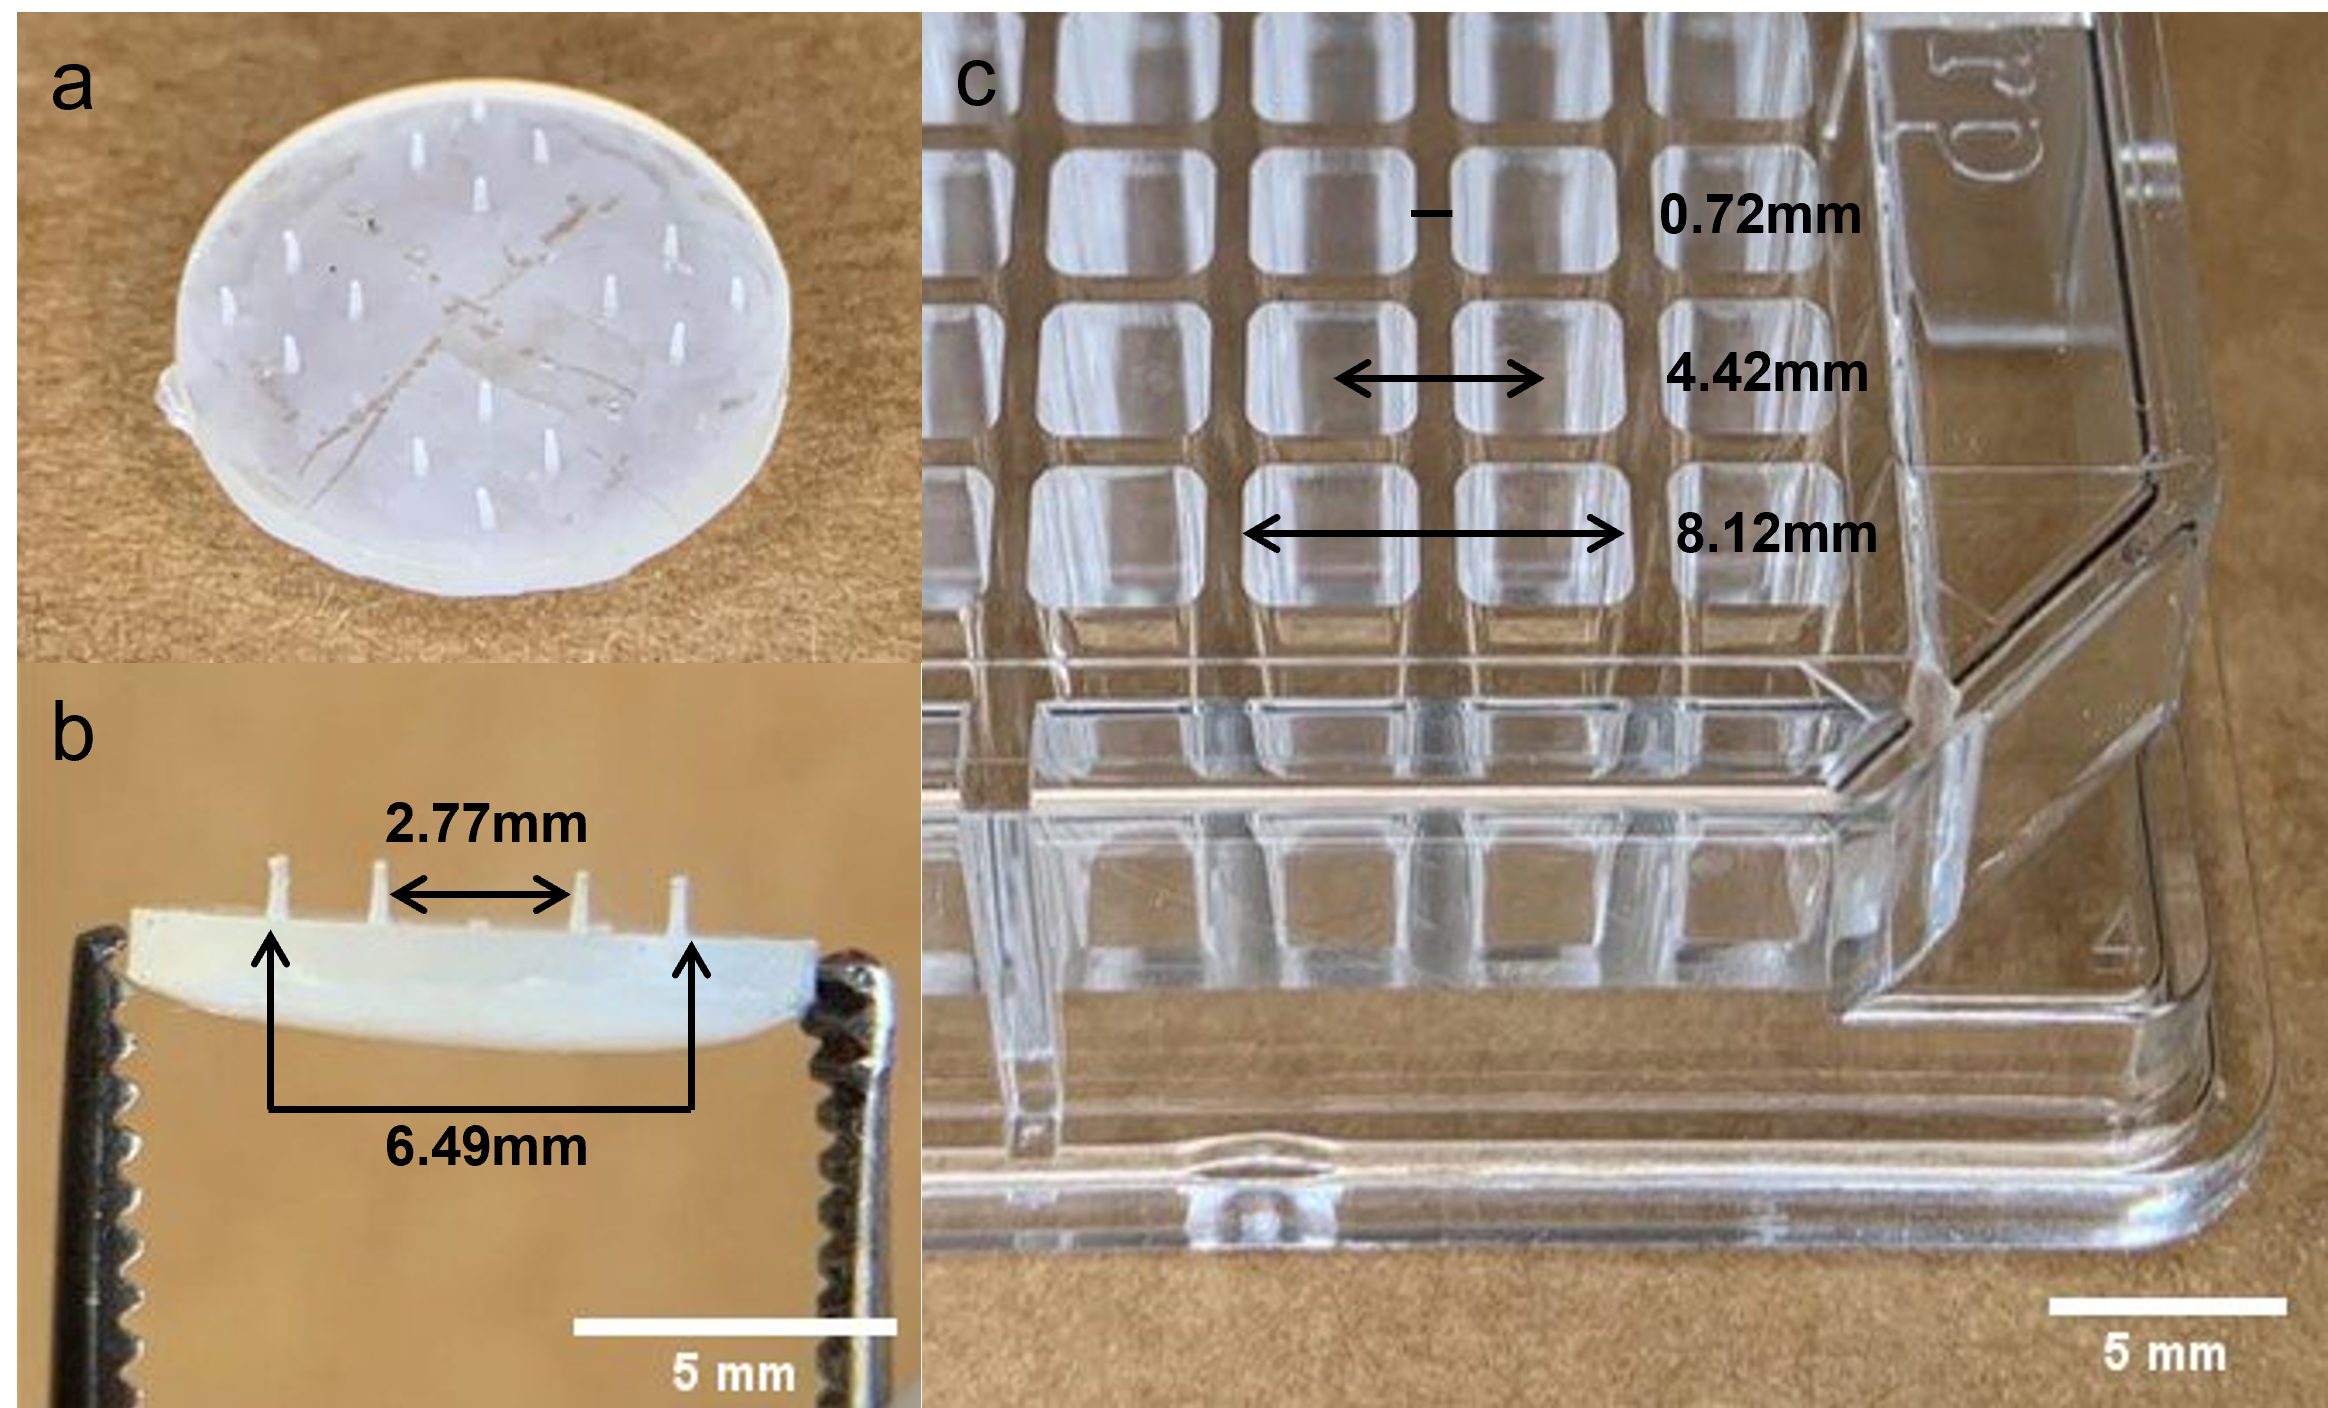 A Microneedle-Microplate Platform to Detect Biomarkers in the Skin